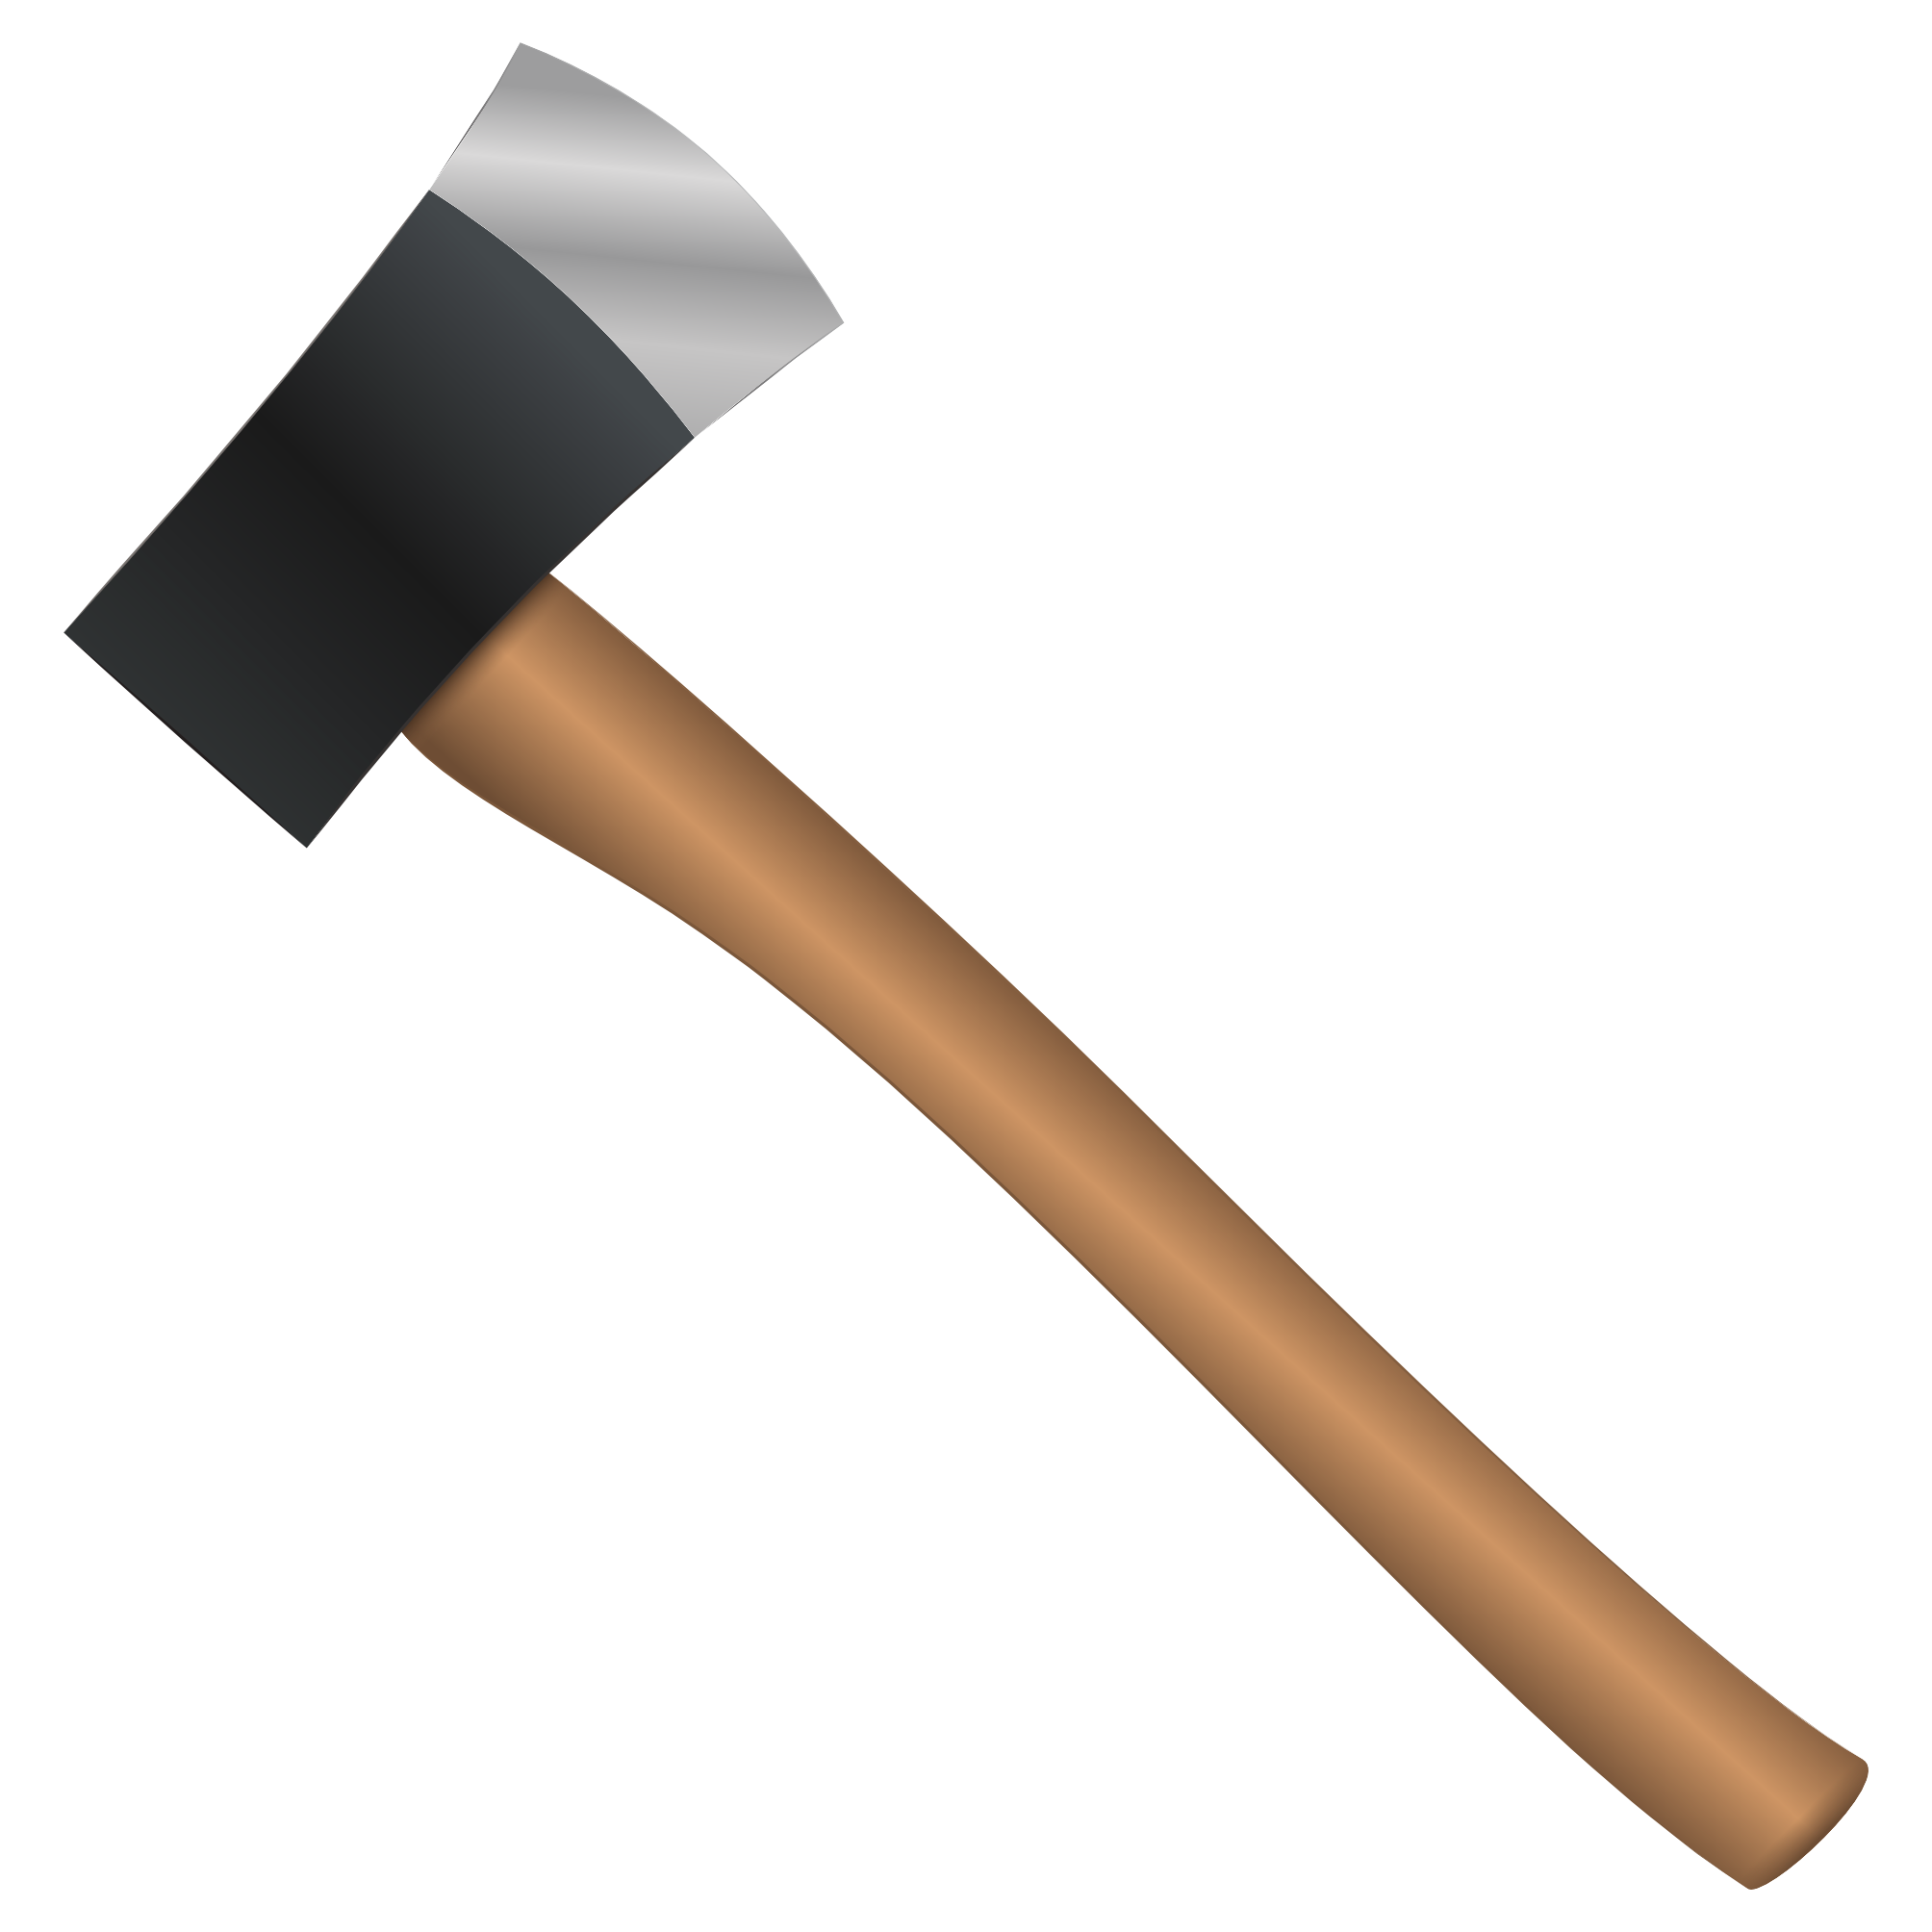 Axe PNG HD Images - Axe Png